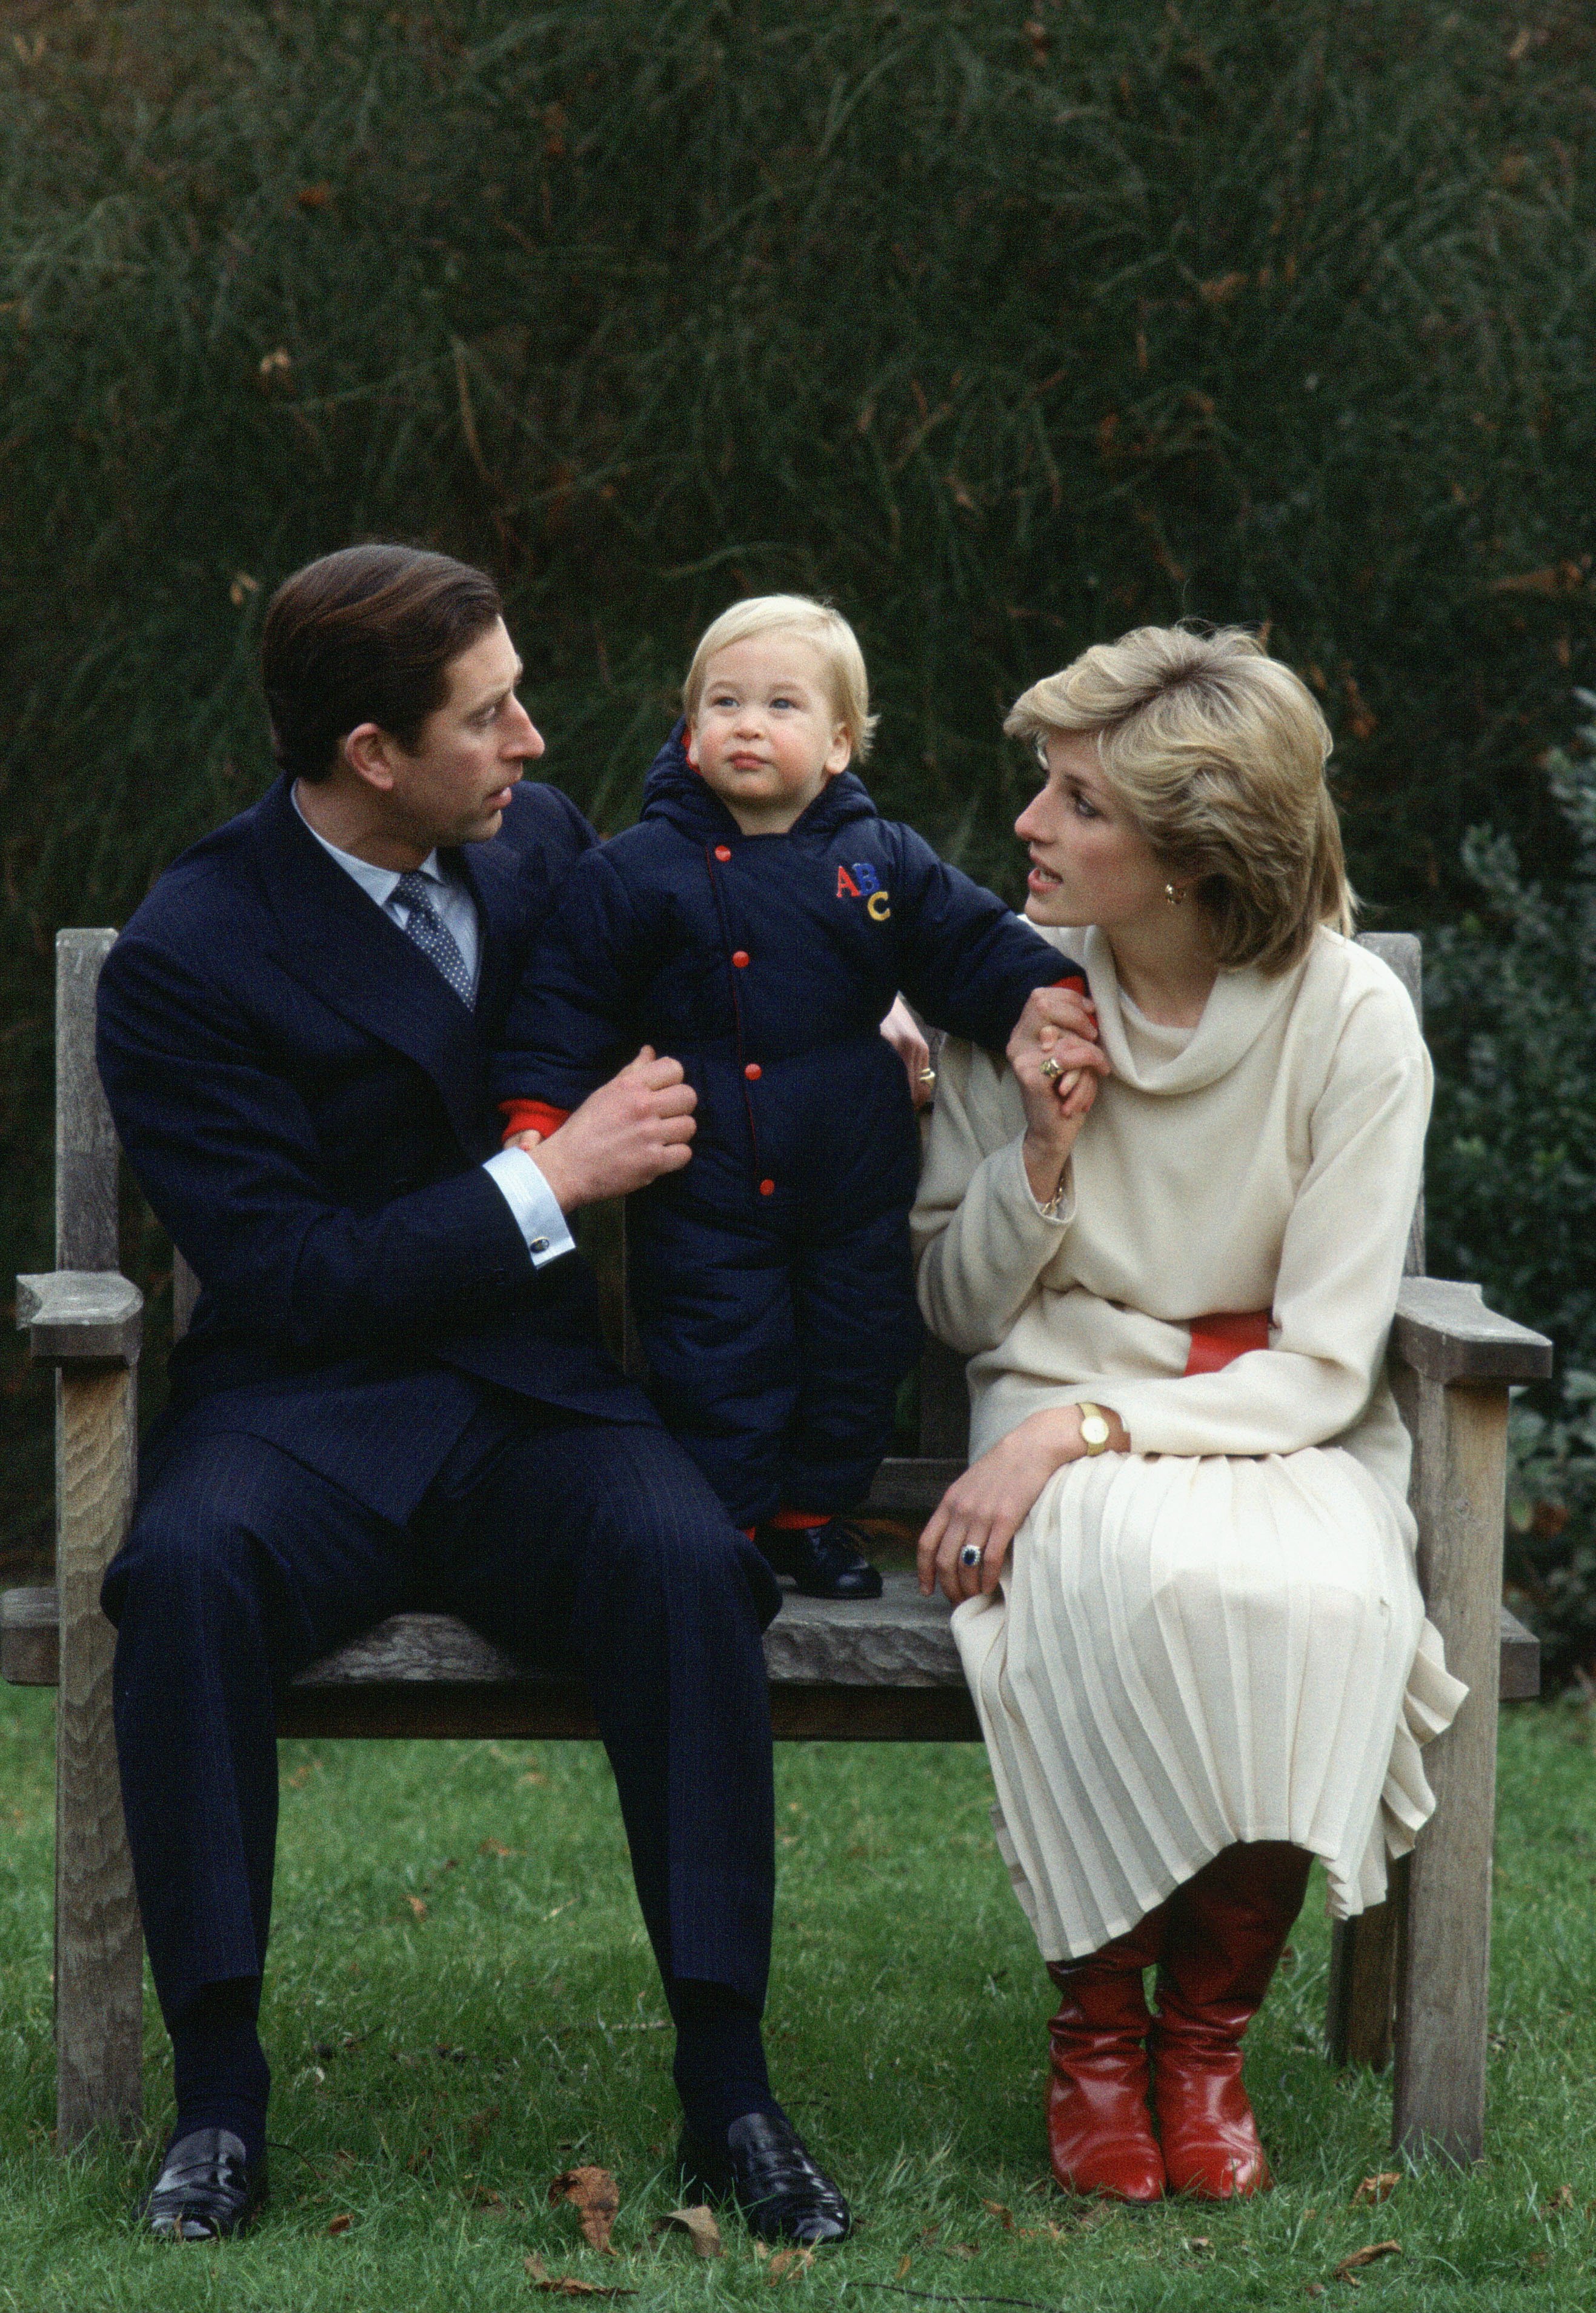 King Charles III and Princess Diana sitting on a bench for a photocall with their son, Prince William (age approximately 18 months), in their garden at Kensington Palace. | Source: Getty Images